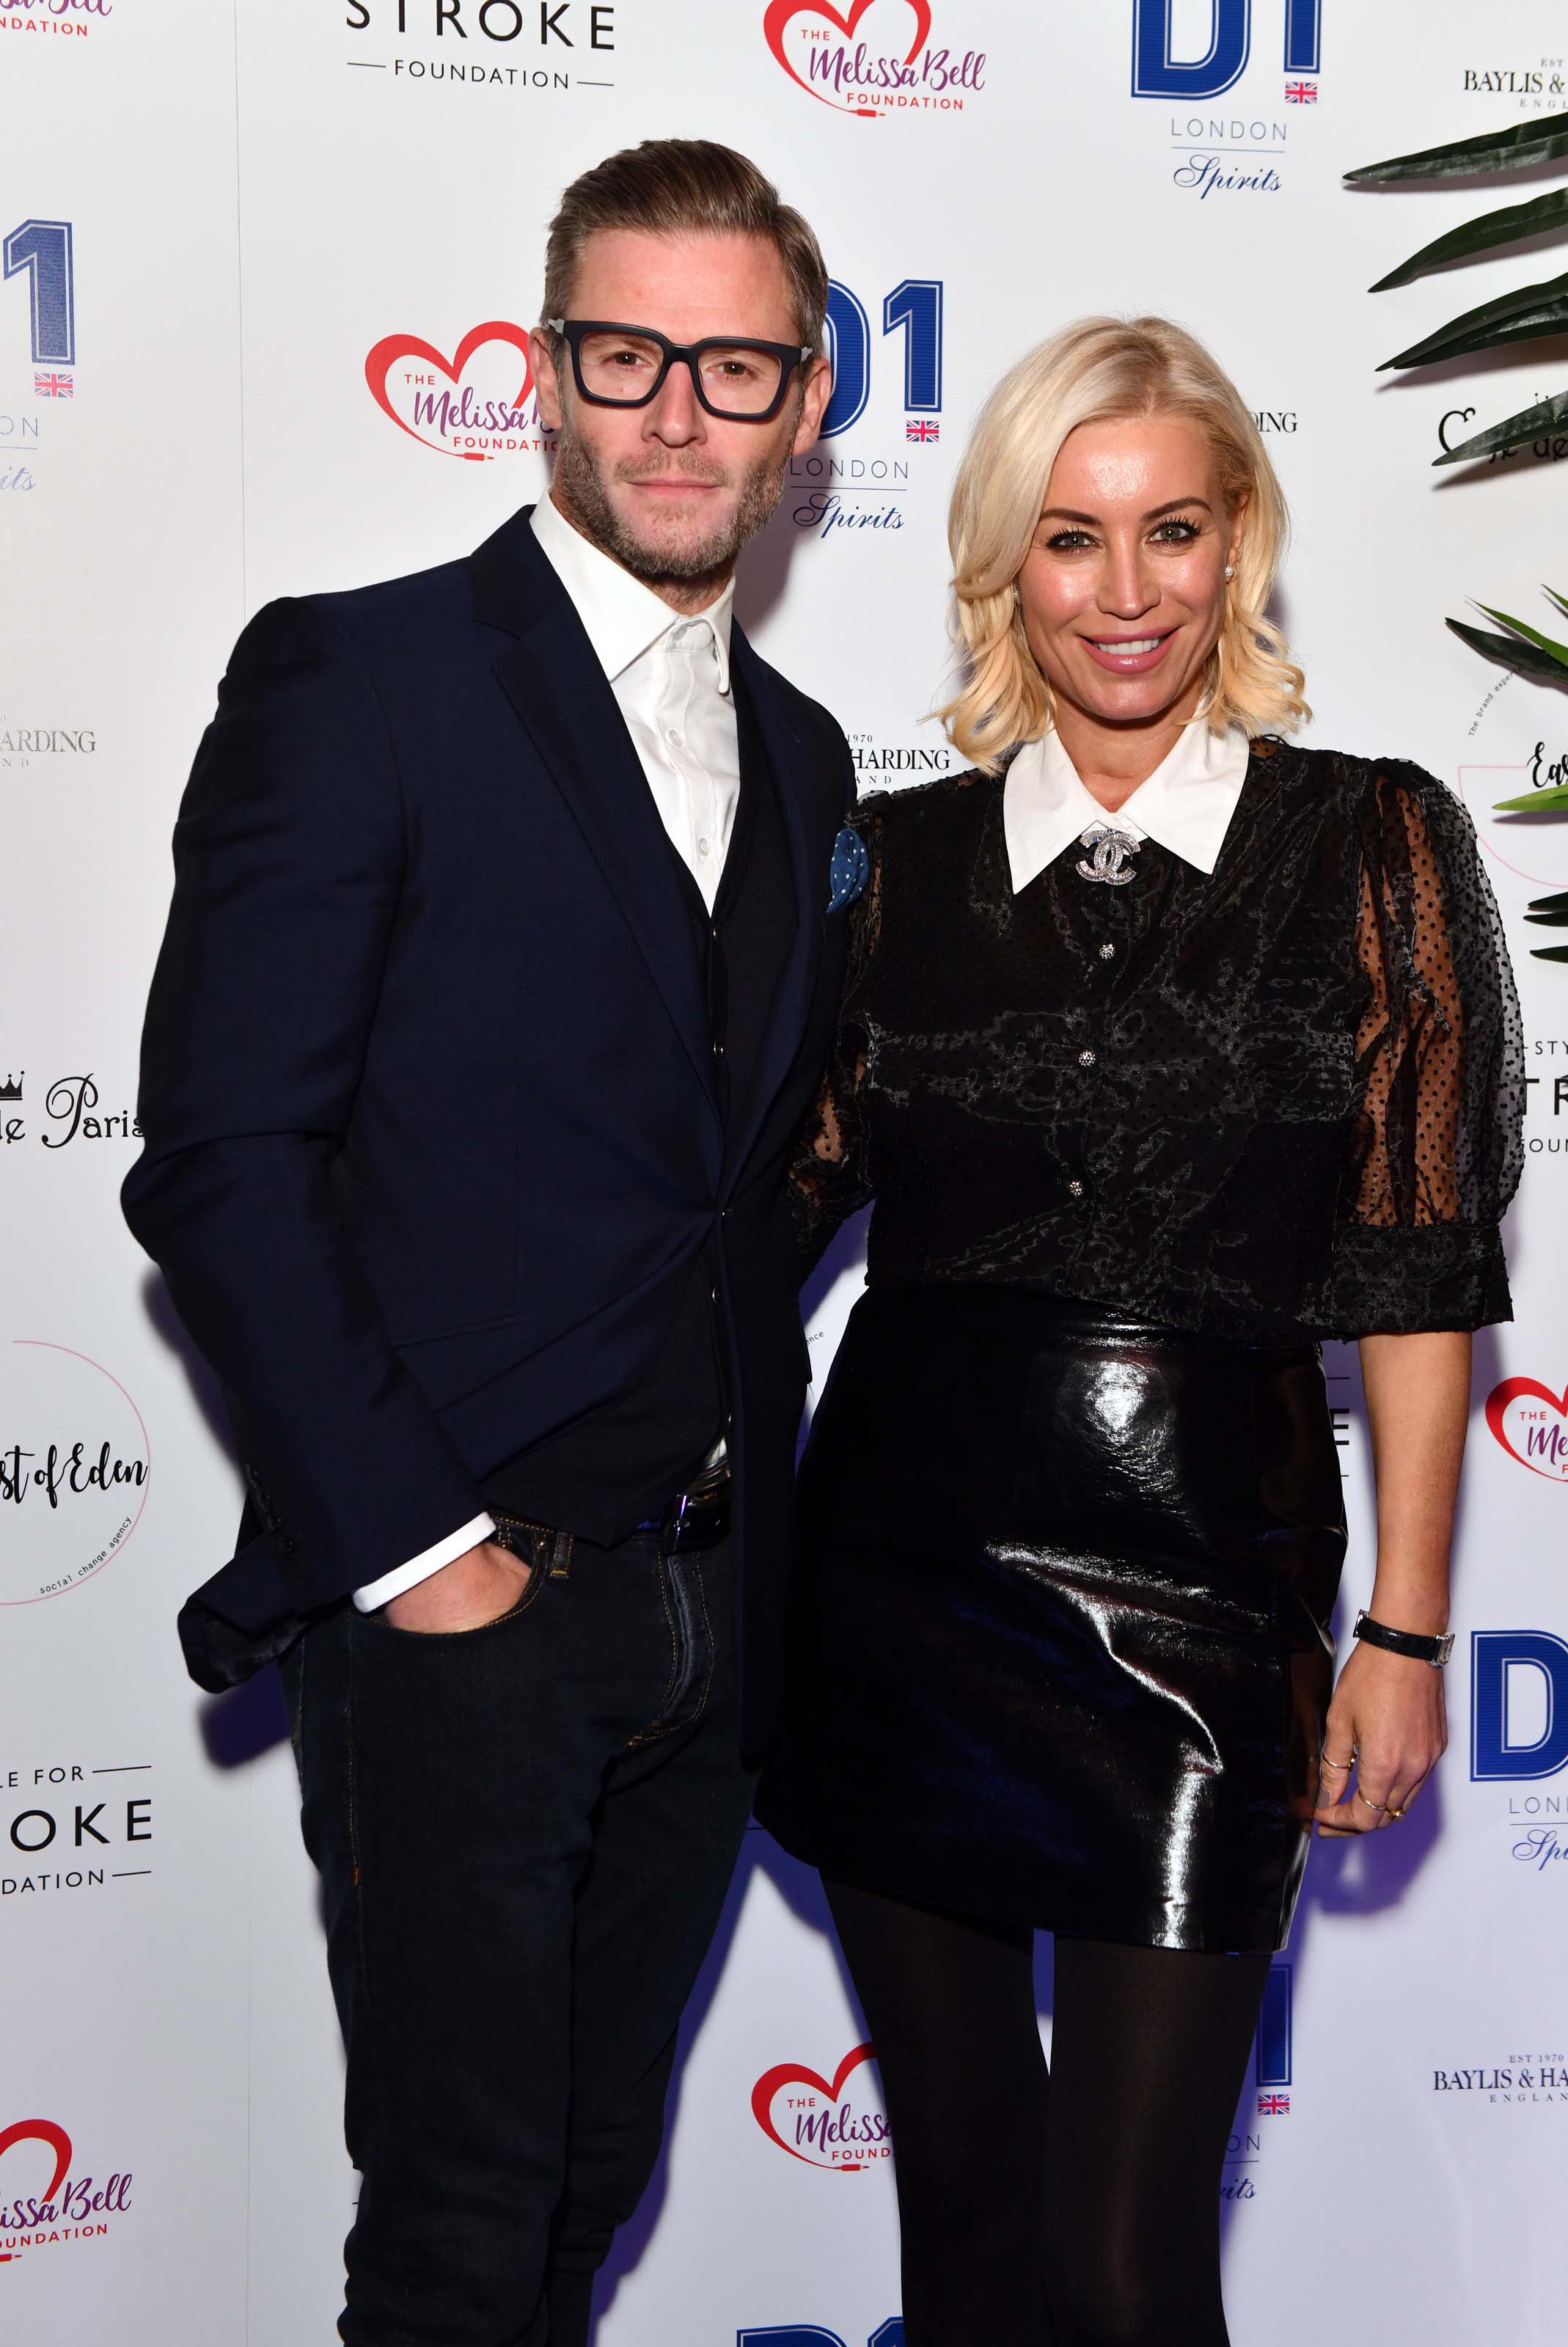 Denise Van Outen attends Style for Stroke Foundation: The Fall Ball